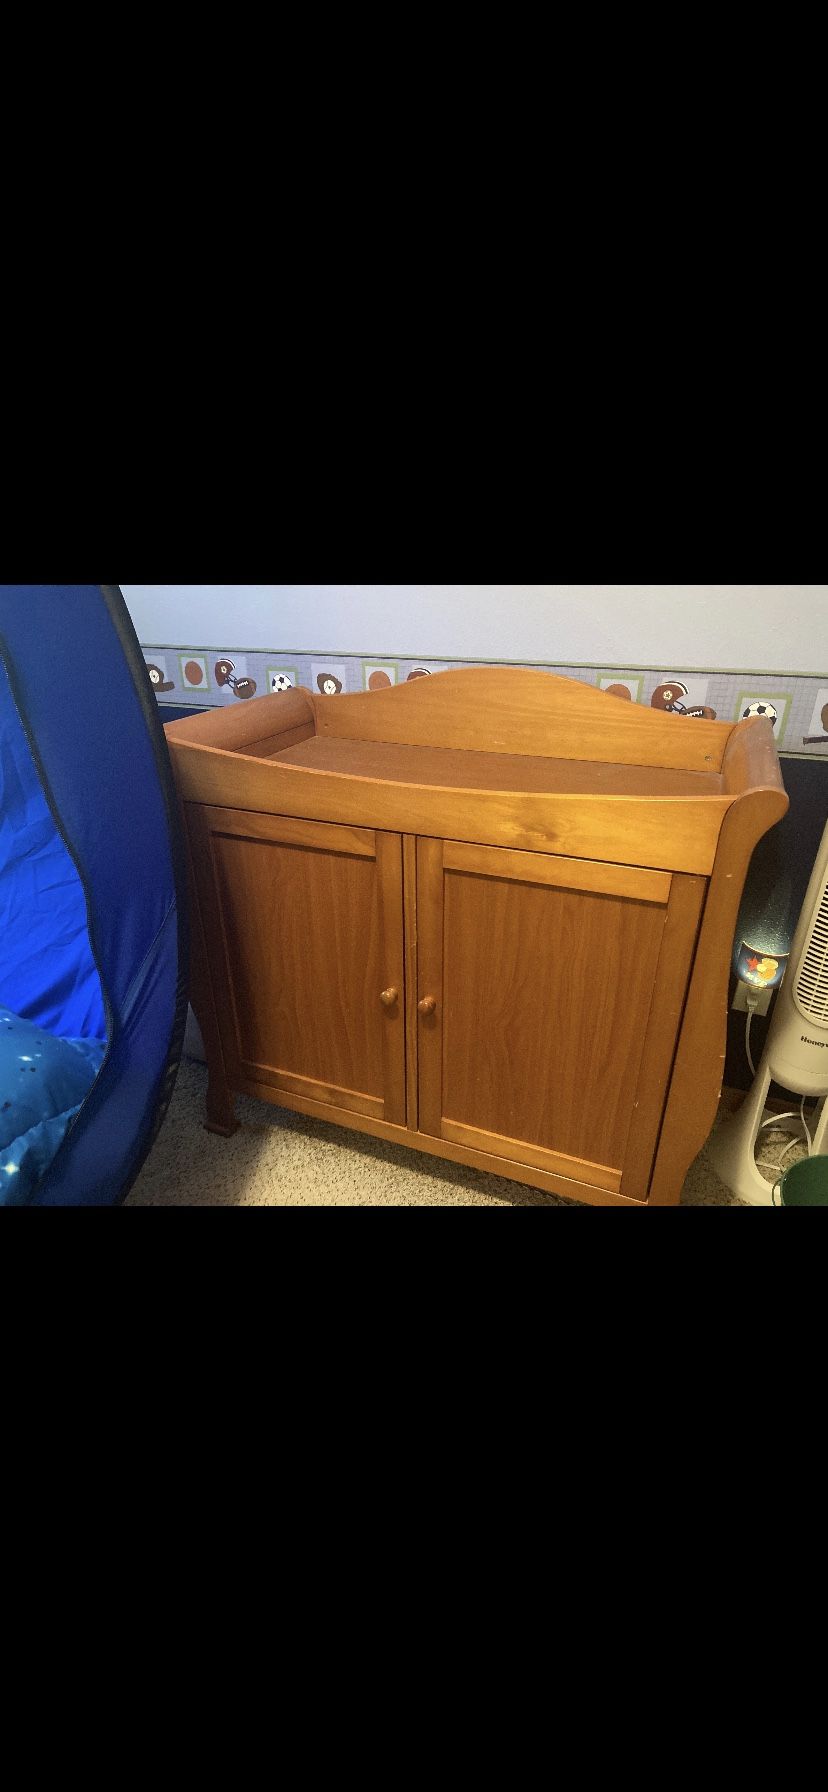 Oak Cabinet with storage. Can be used as a Dresser or smaller TV cabinet or a changing table for a nursery. 39”Lx36”Hx20”W